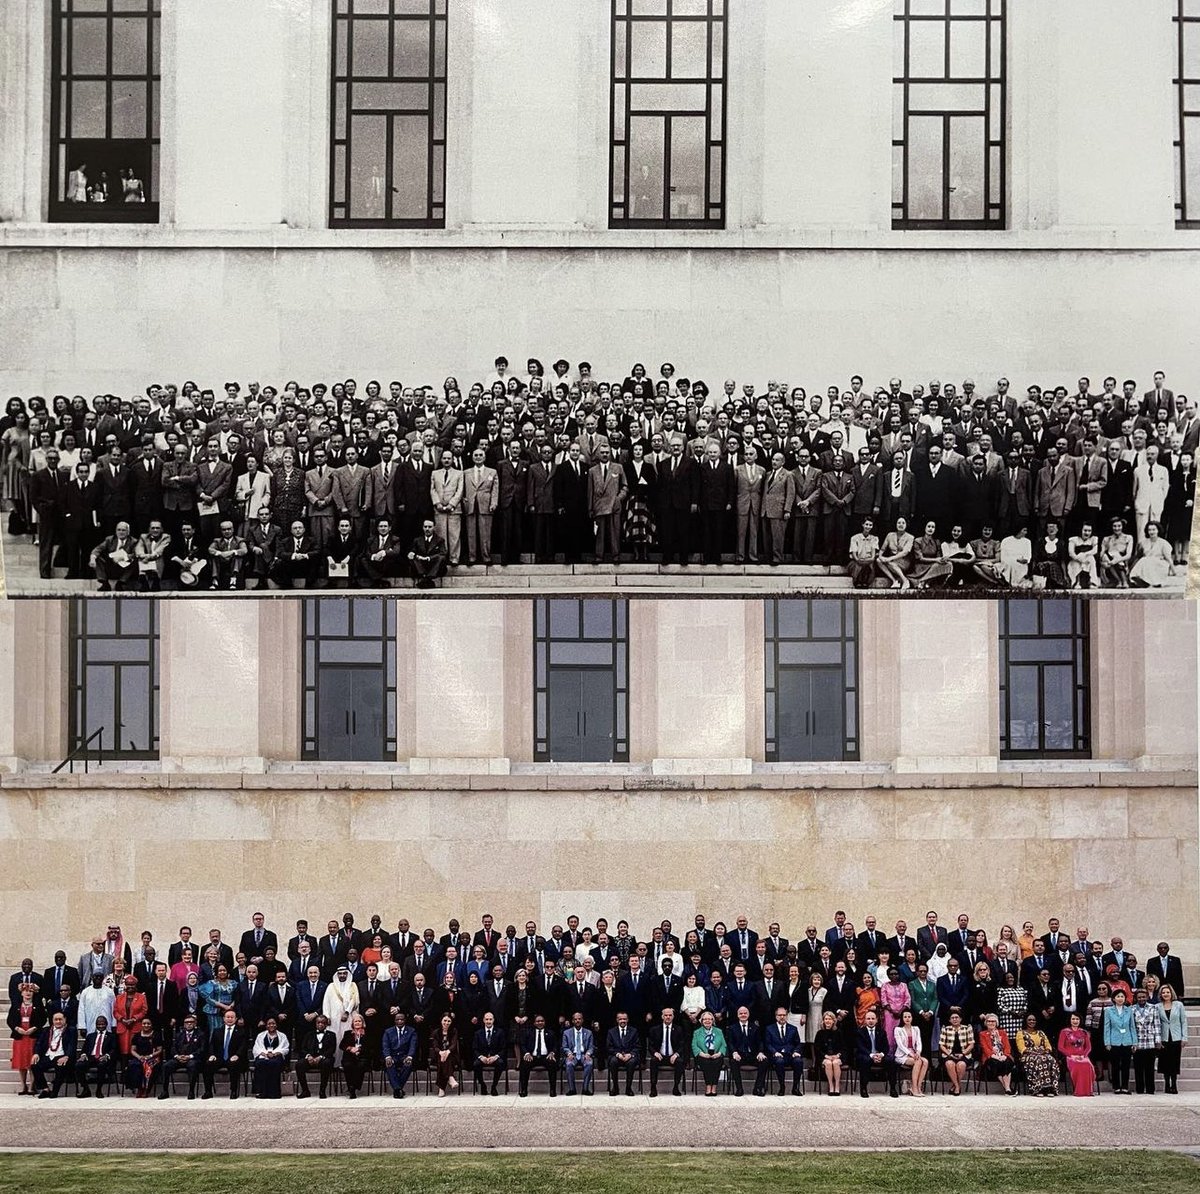 @DrTedros 'At the beginning of this Assembly, we took a photo in exactly the same spot that the photo was taken of the first World Health Assembly in 1948. Thank you all for being part of it'-@DrTedros #WHA76